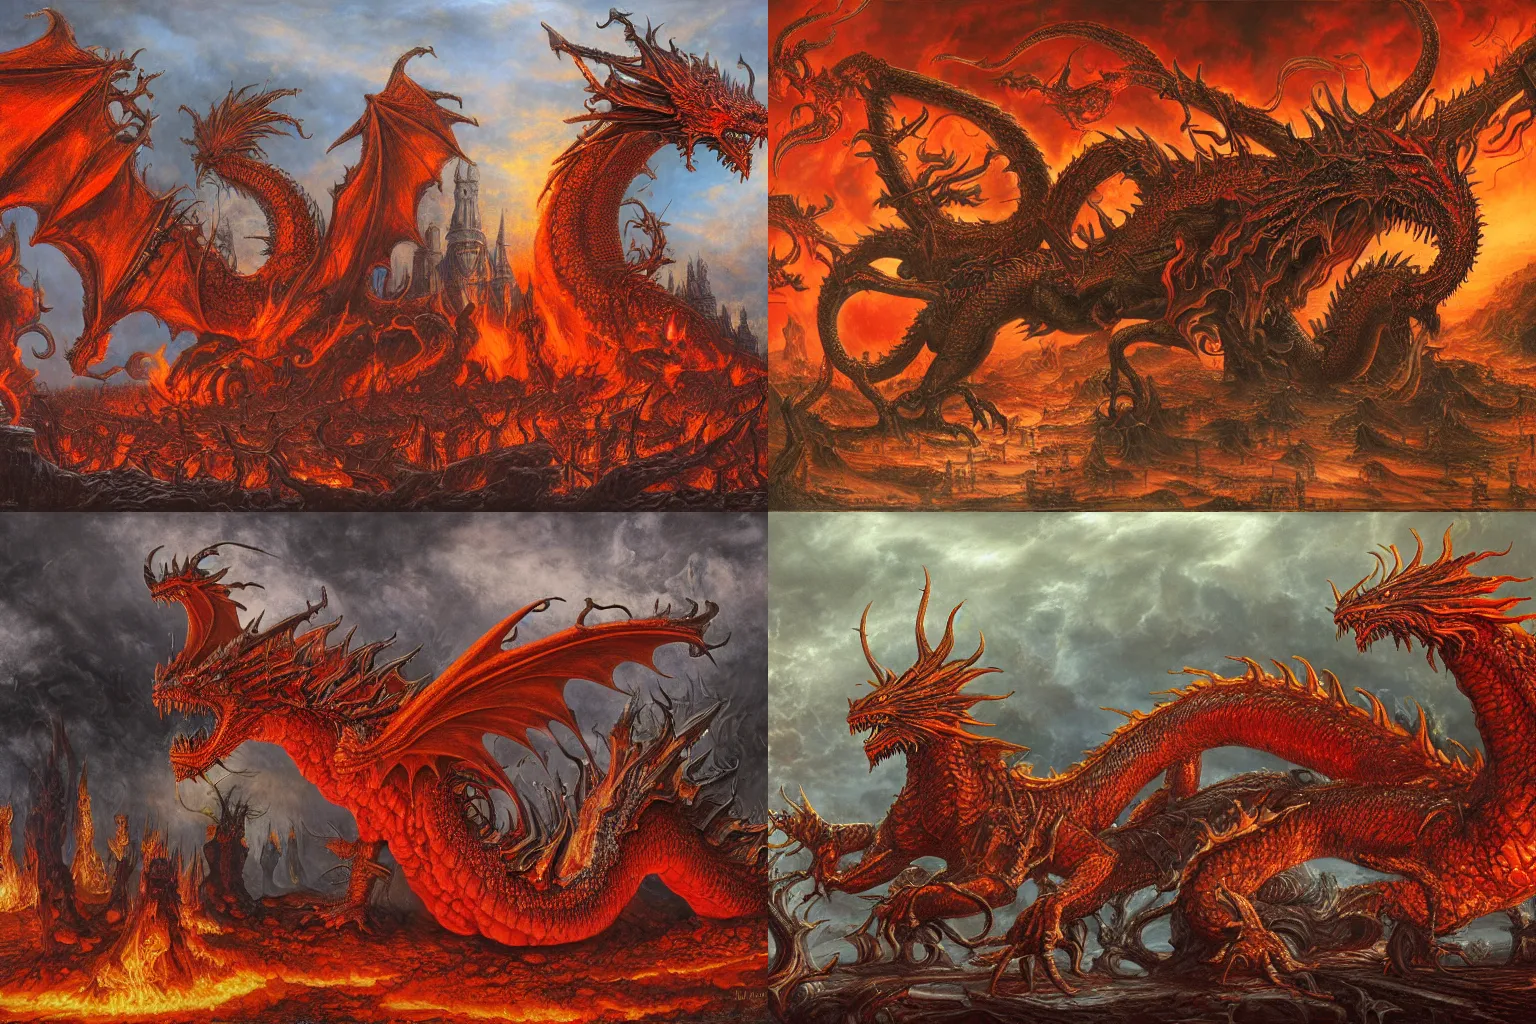 Prompt: a great fiery red dragon with 7 heads wearing crowns, and ten horns, detailed matte painting by Mariusz Lewandowski, Giger and Jacek Yerka